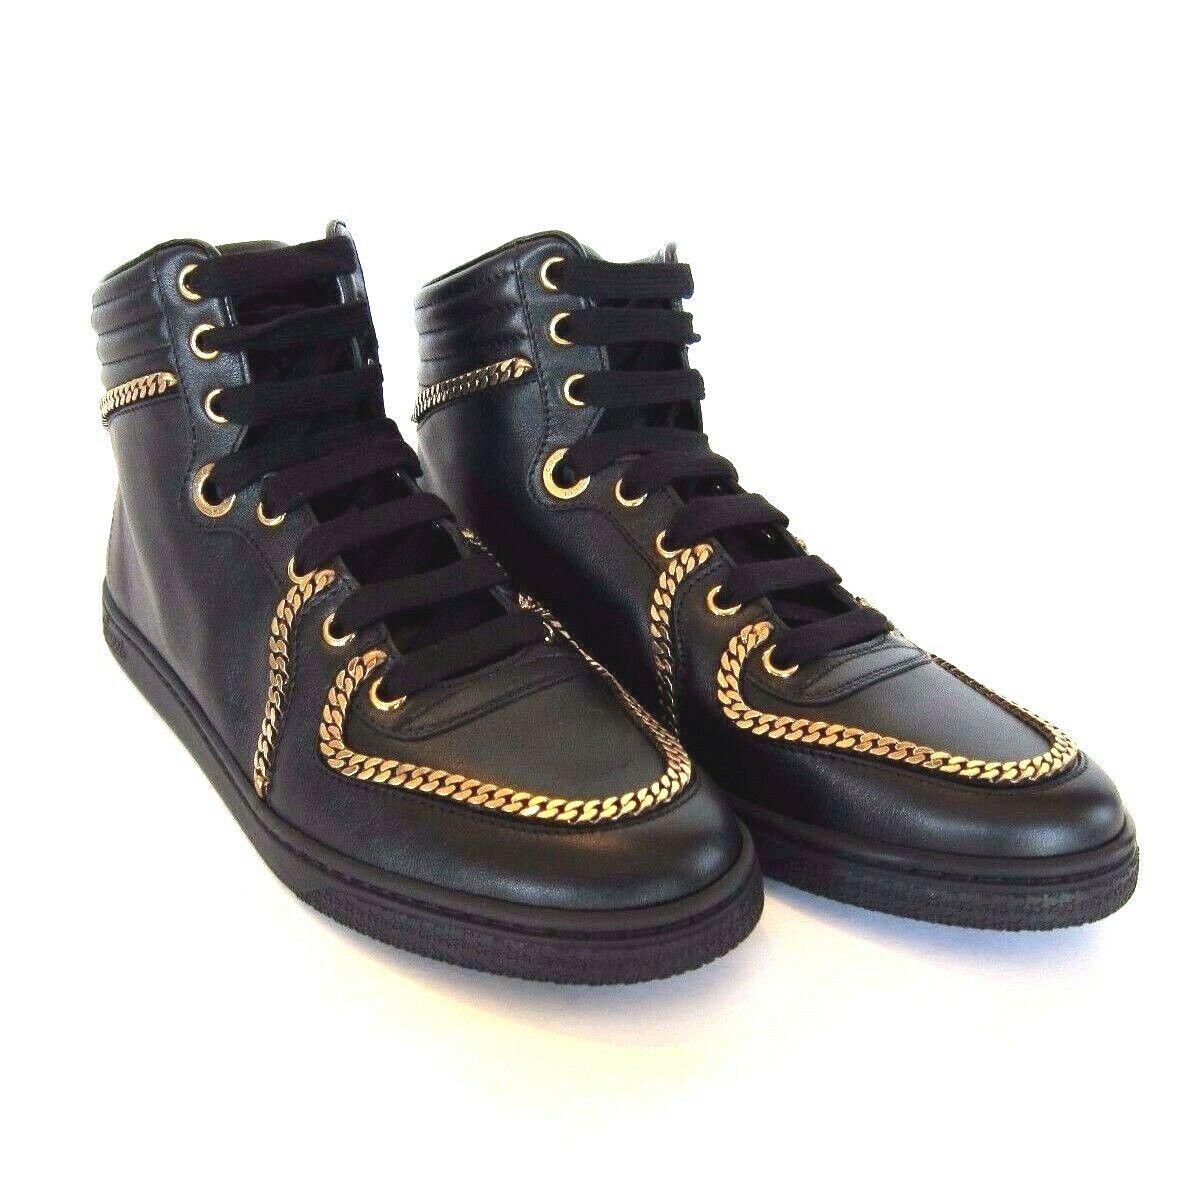 J-31277 New Gucci Black Leather Gold Chain Sneakers Shoe Marked Size 38 ...